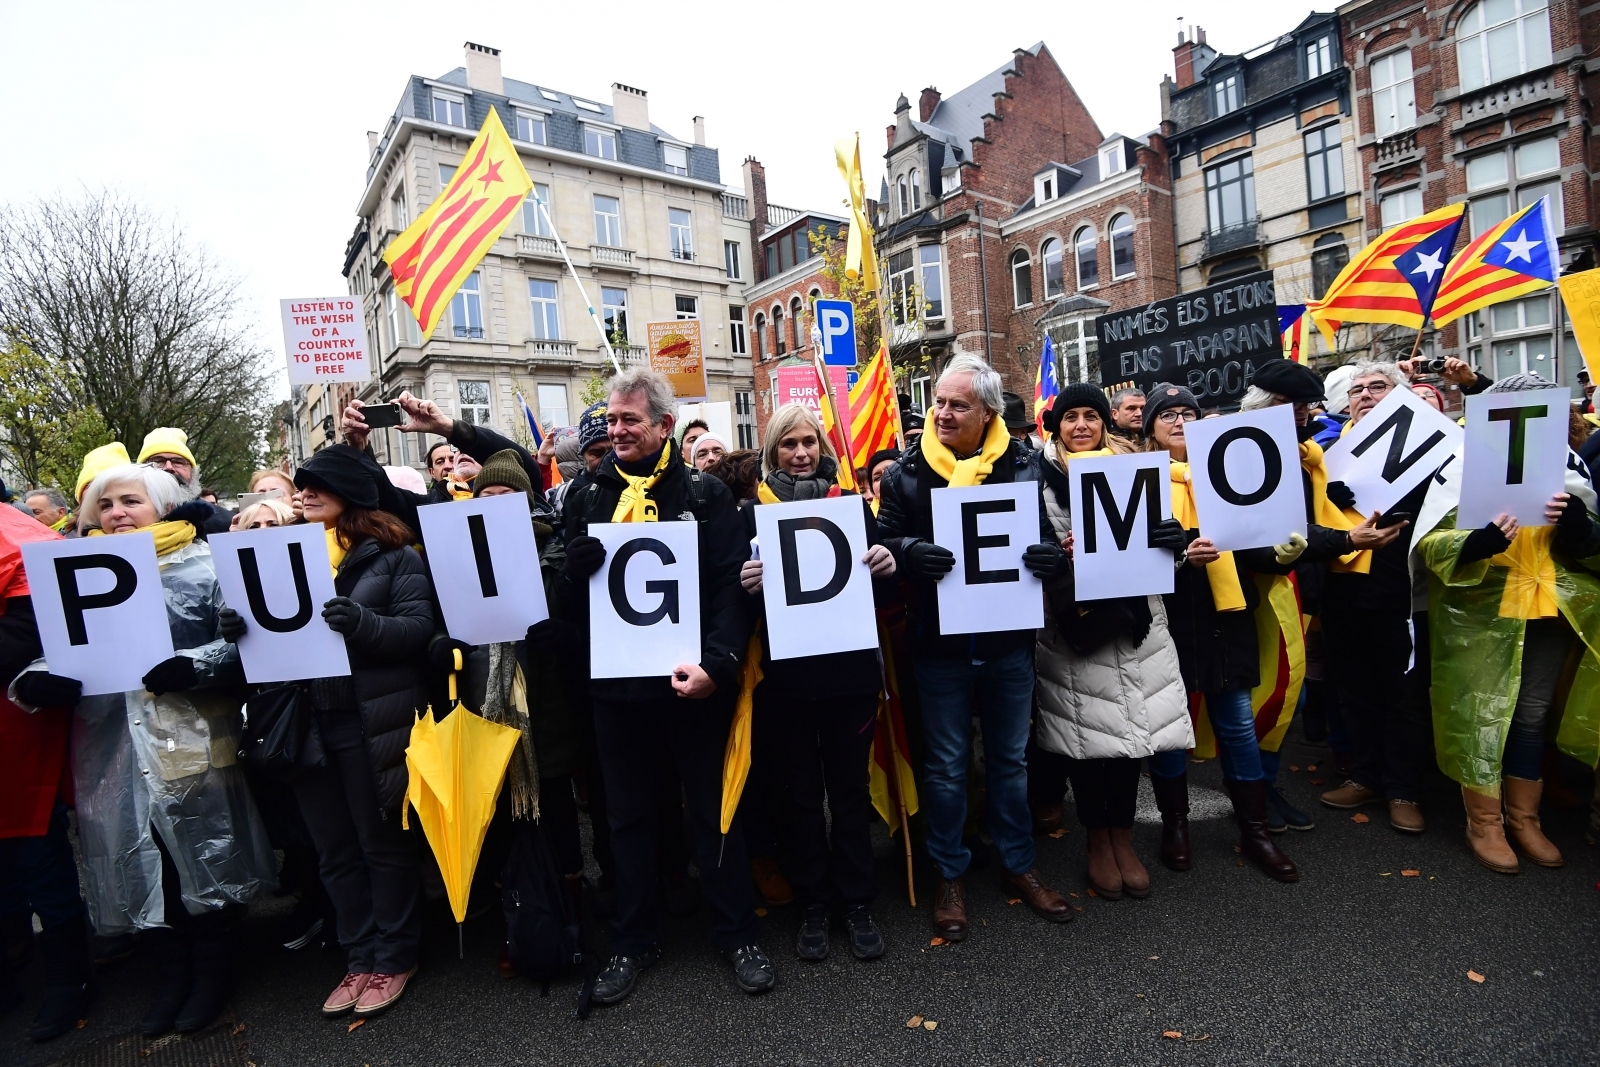 Catalonia independence Brussels